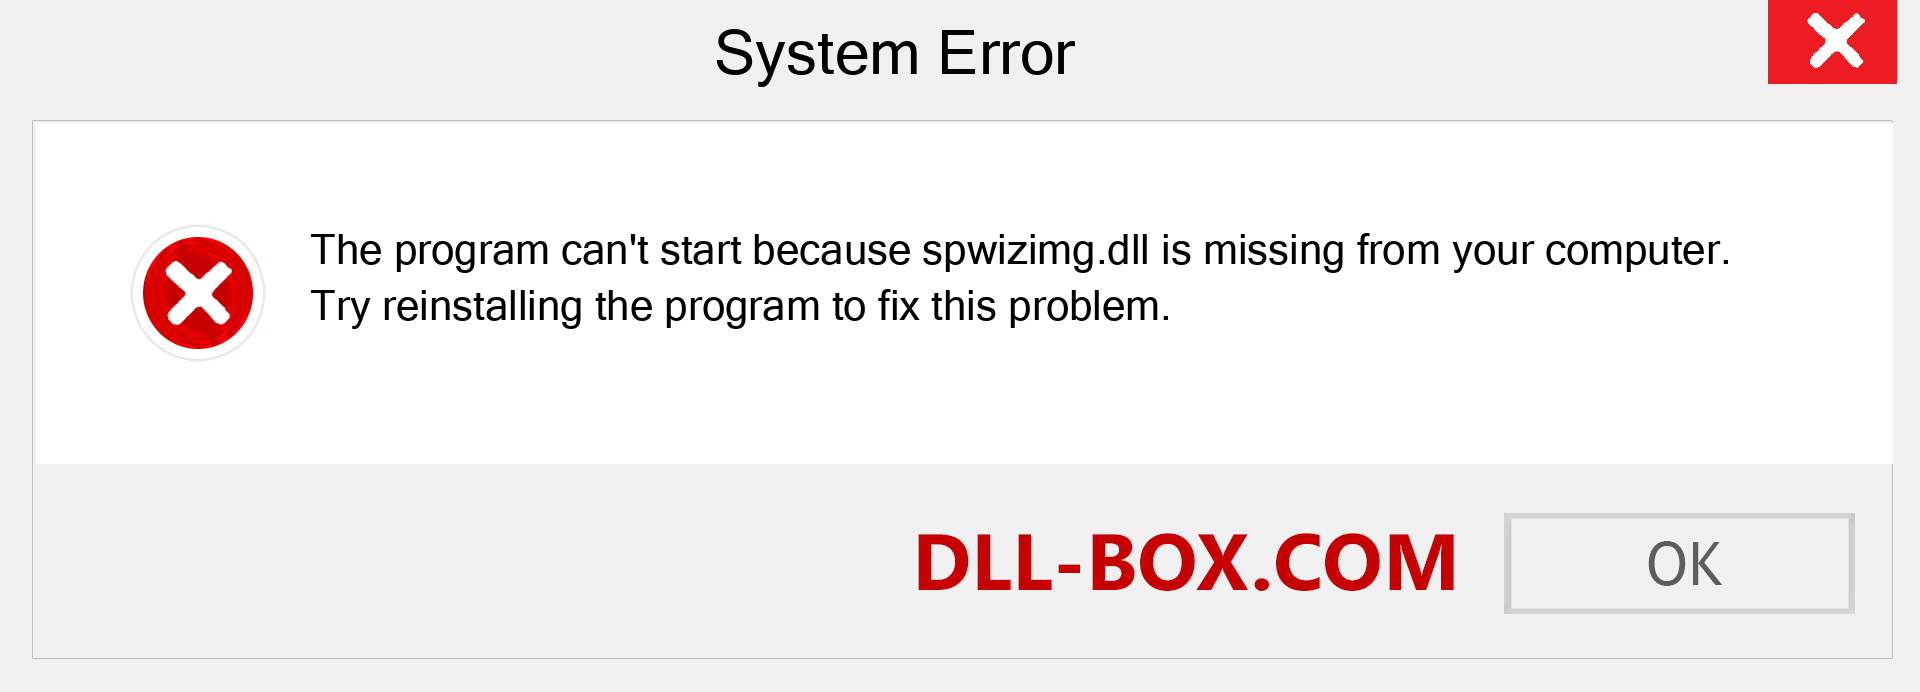  spwizimg.dll file is missing?. Download for Windows 7, 8, 10 - Fix  spwizimg dll Missing Error on Windows, photos, images